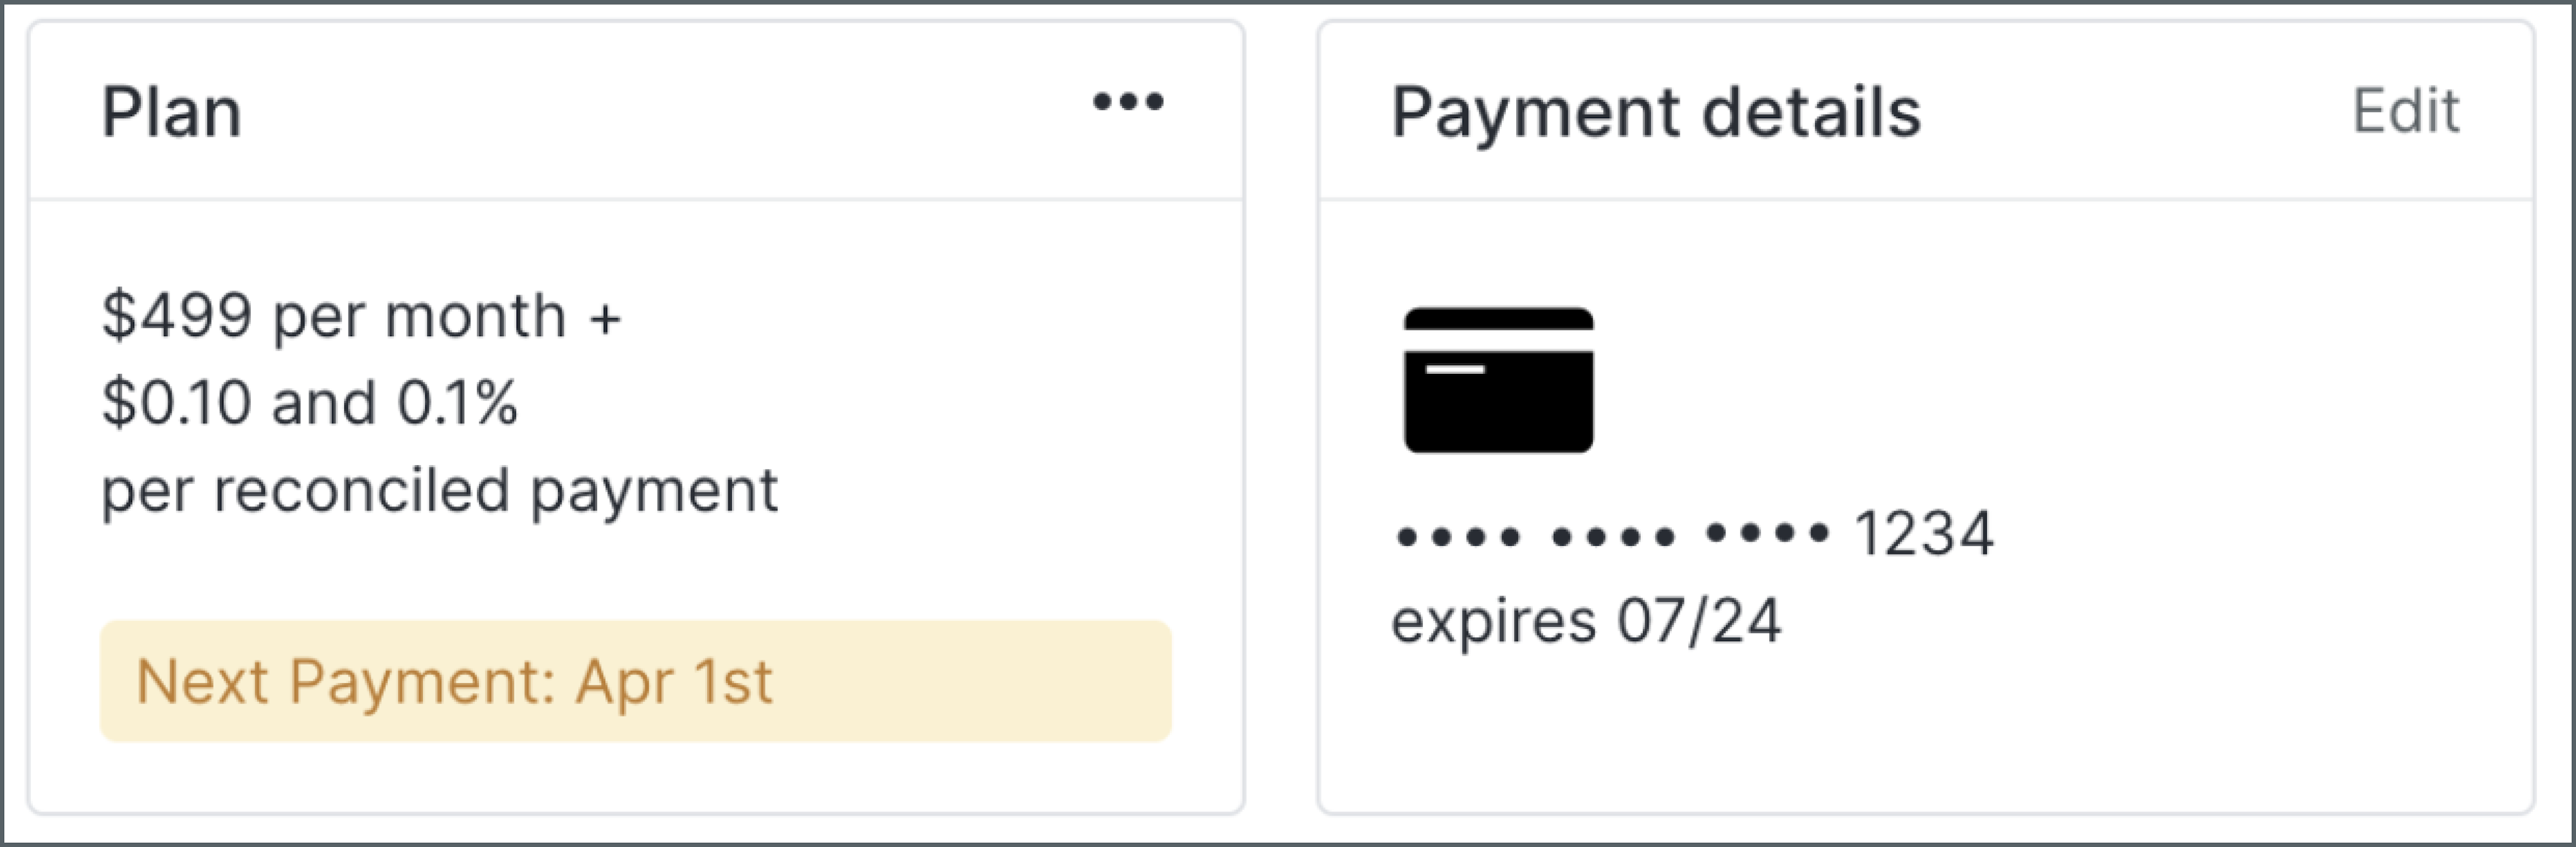 Screen: Plan and Payment Details